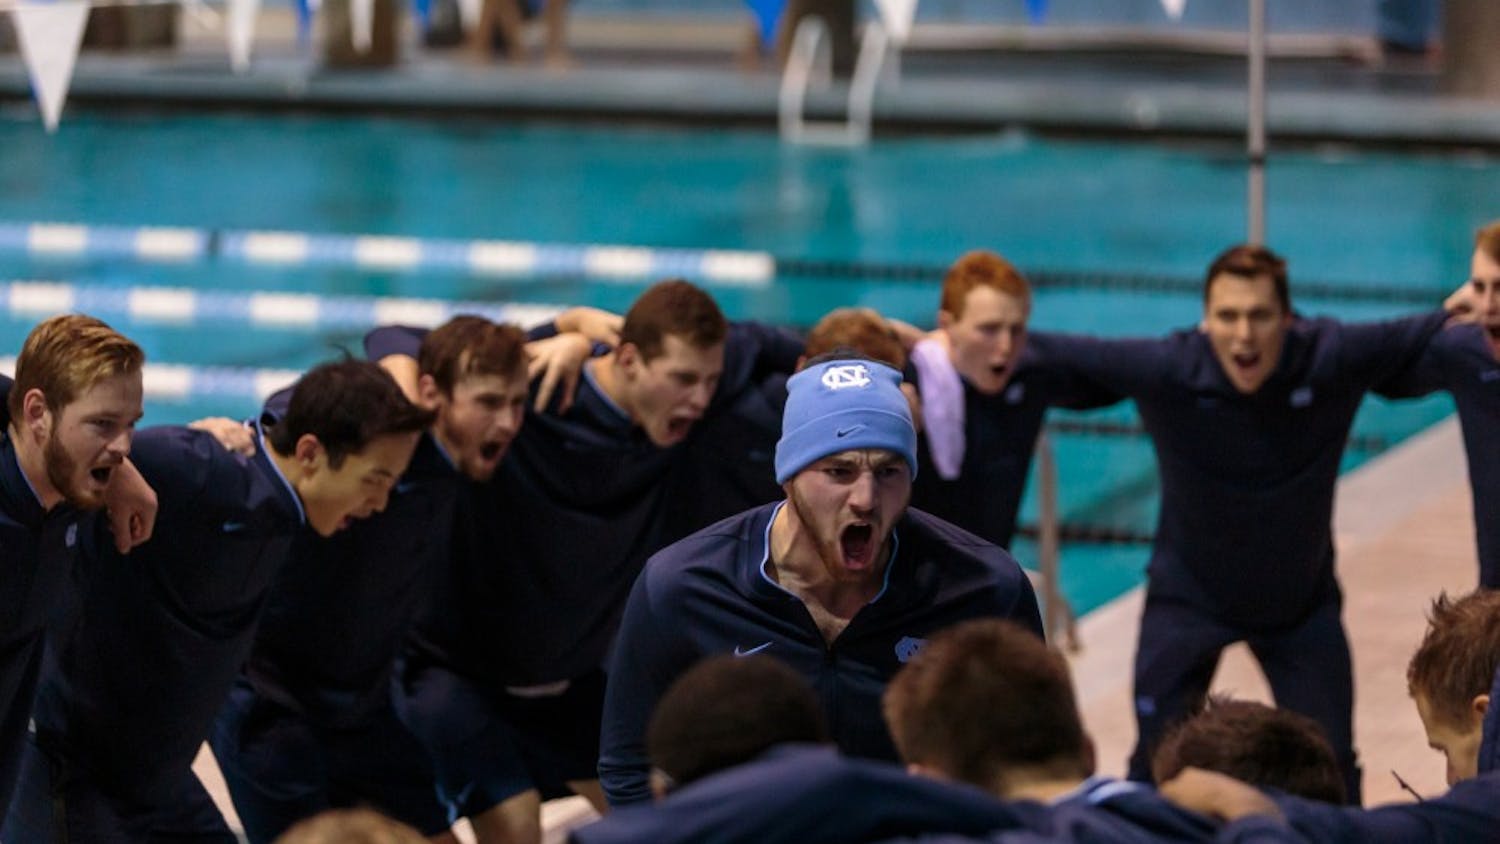 UNC makes a splash, remains undefeated against USC on Friday, Oct. 26